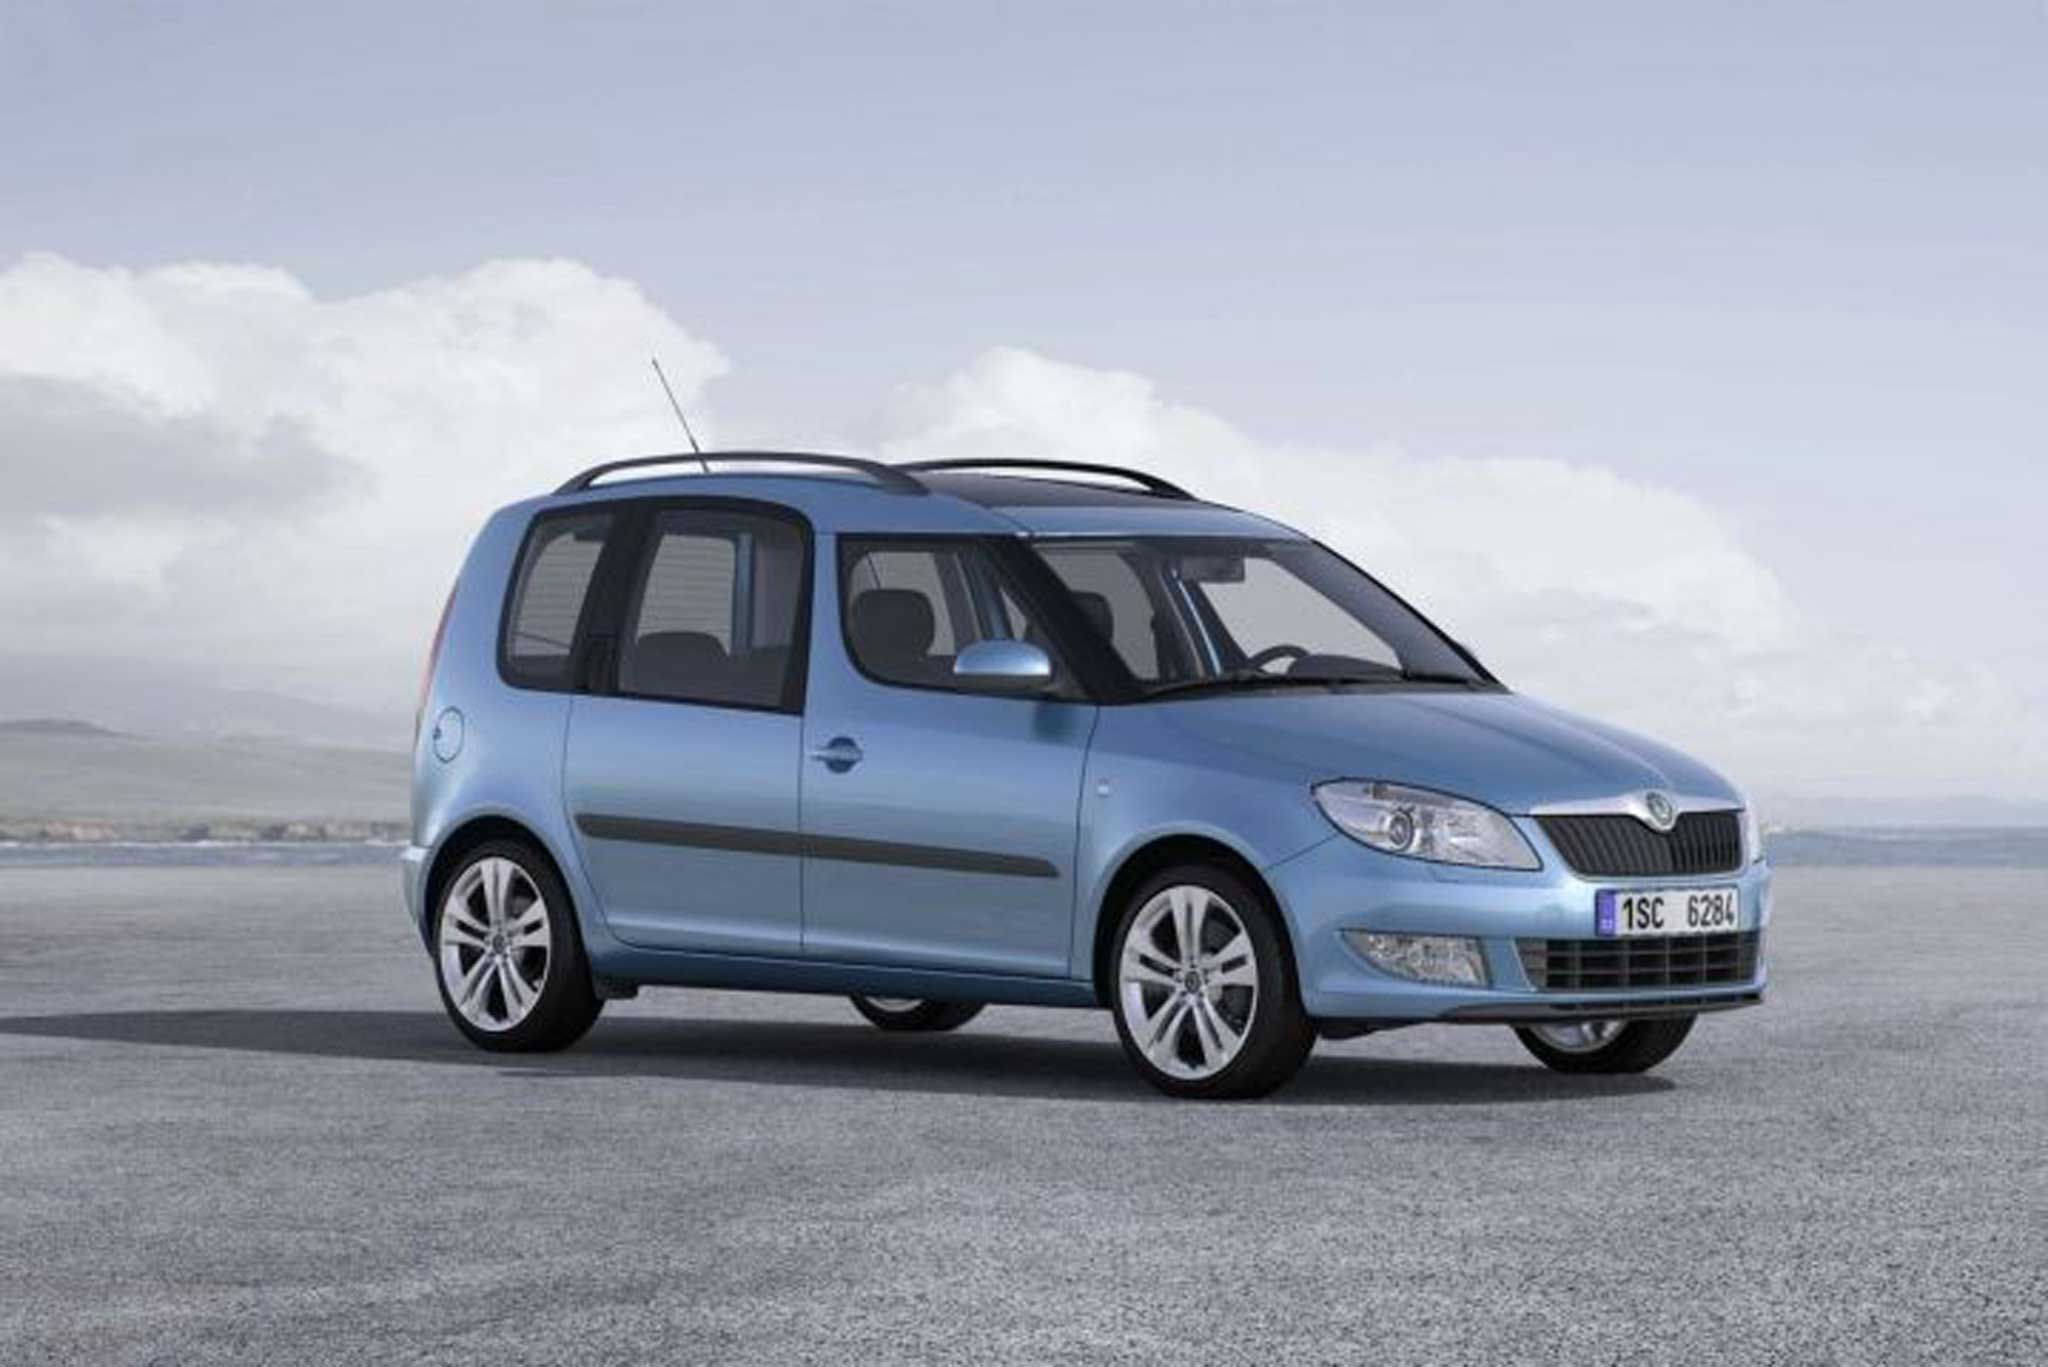 The fascinating Skoda Roomster is effectively a compact people carrier with 4x4 styling